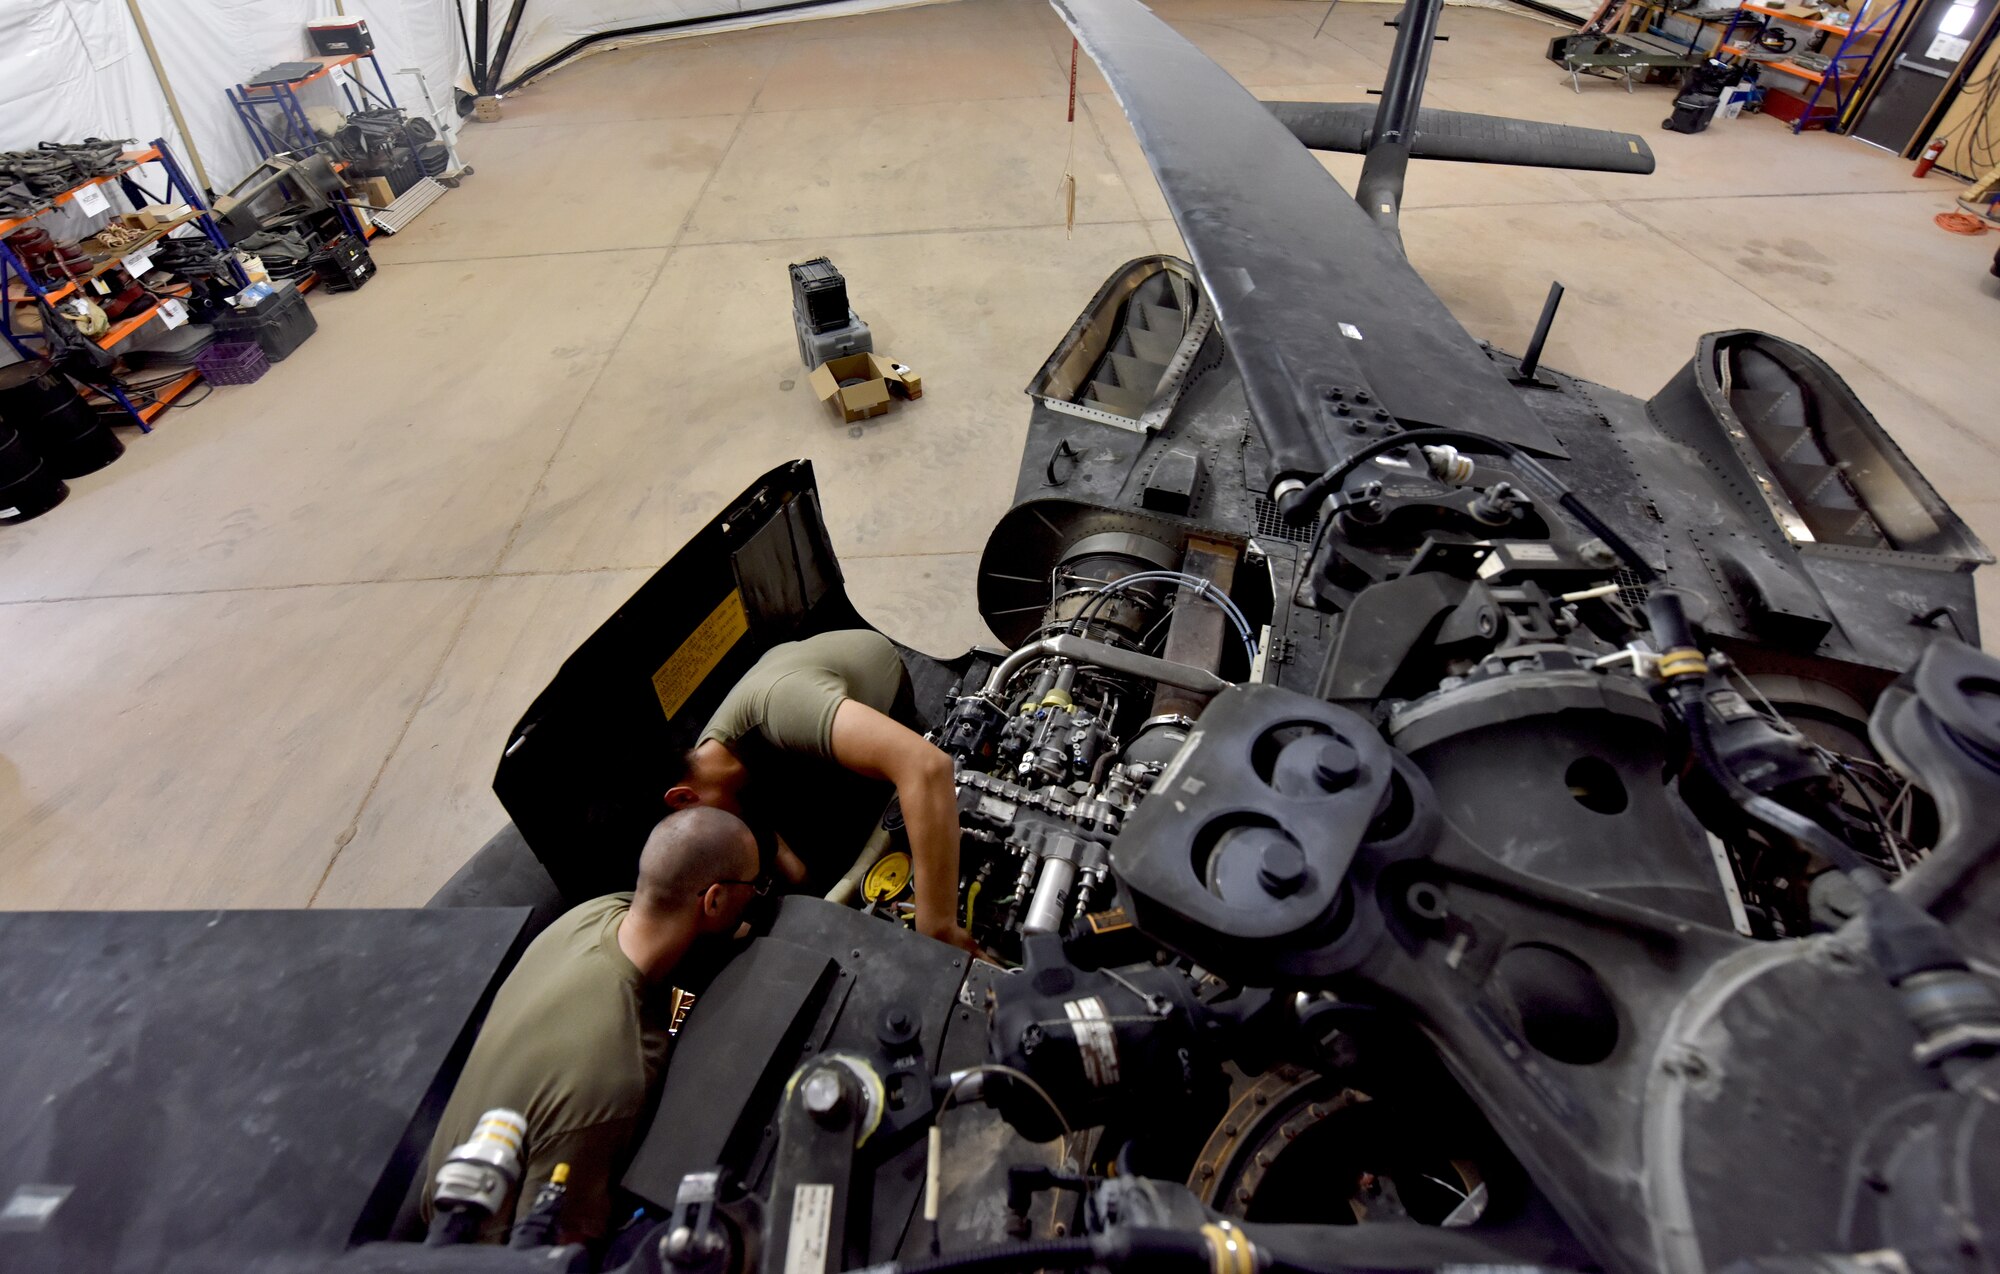 U.S. Army Soldiers from Task Force Javelin conduct maintenance on a UH-60 Blackhawk helicopter at Prince Sultan Air Base, Kingdom of Saudi Arabia